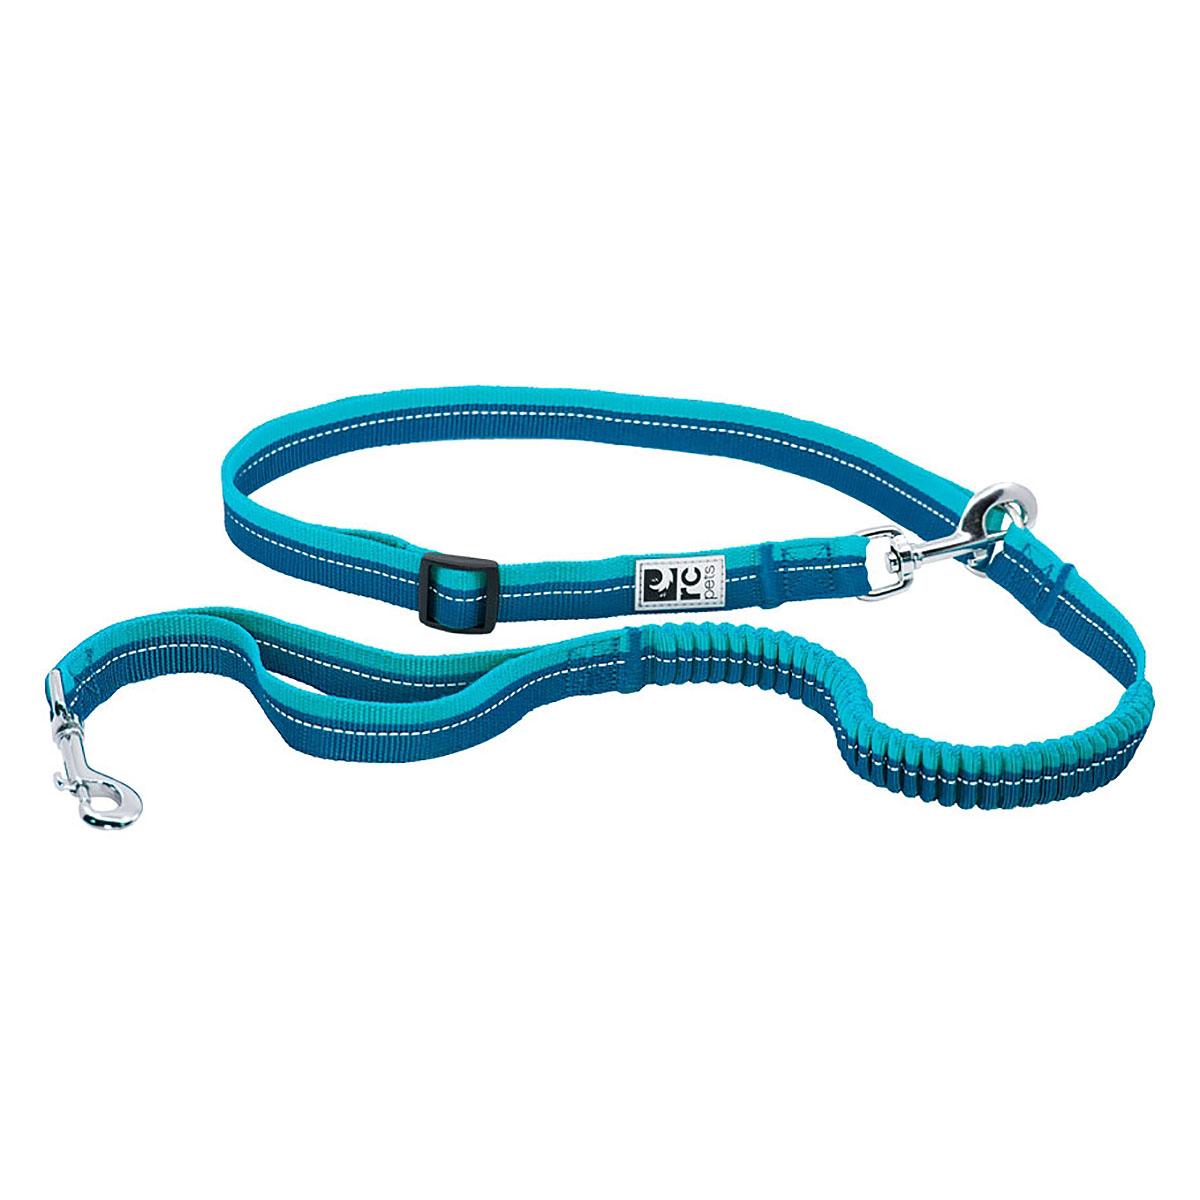 Bungee Active Dog Leash by RC Pets - Arctic Blue and Teal